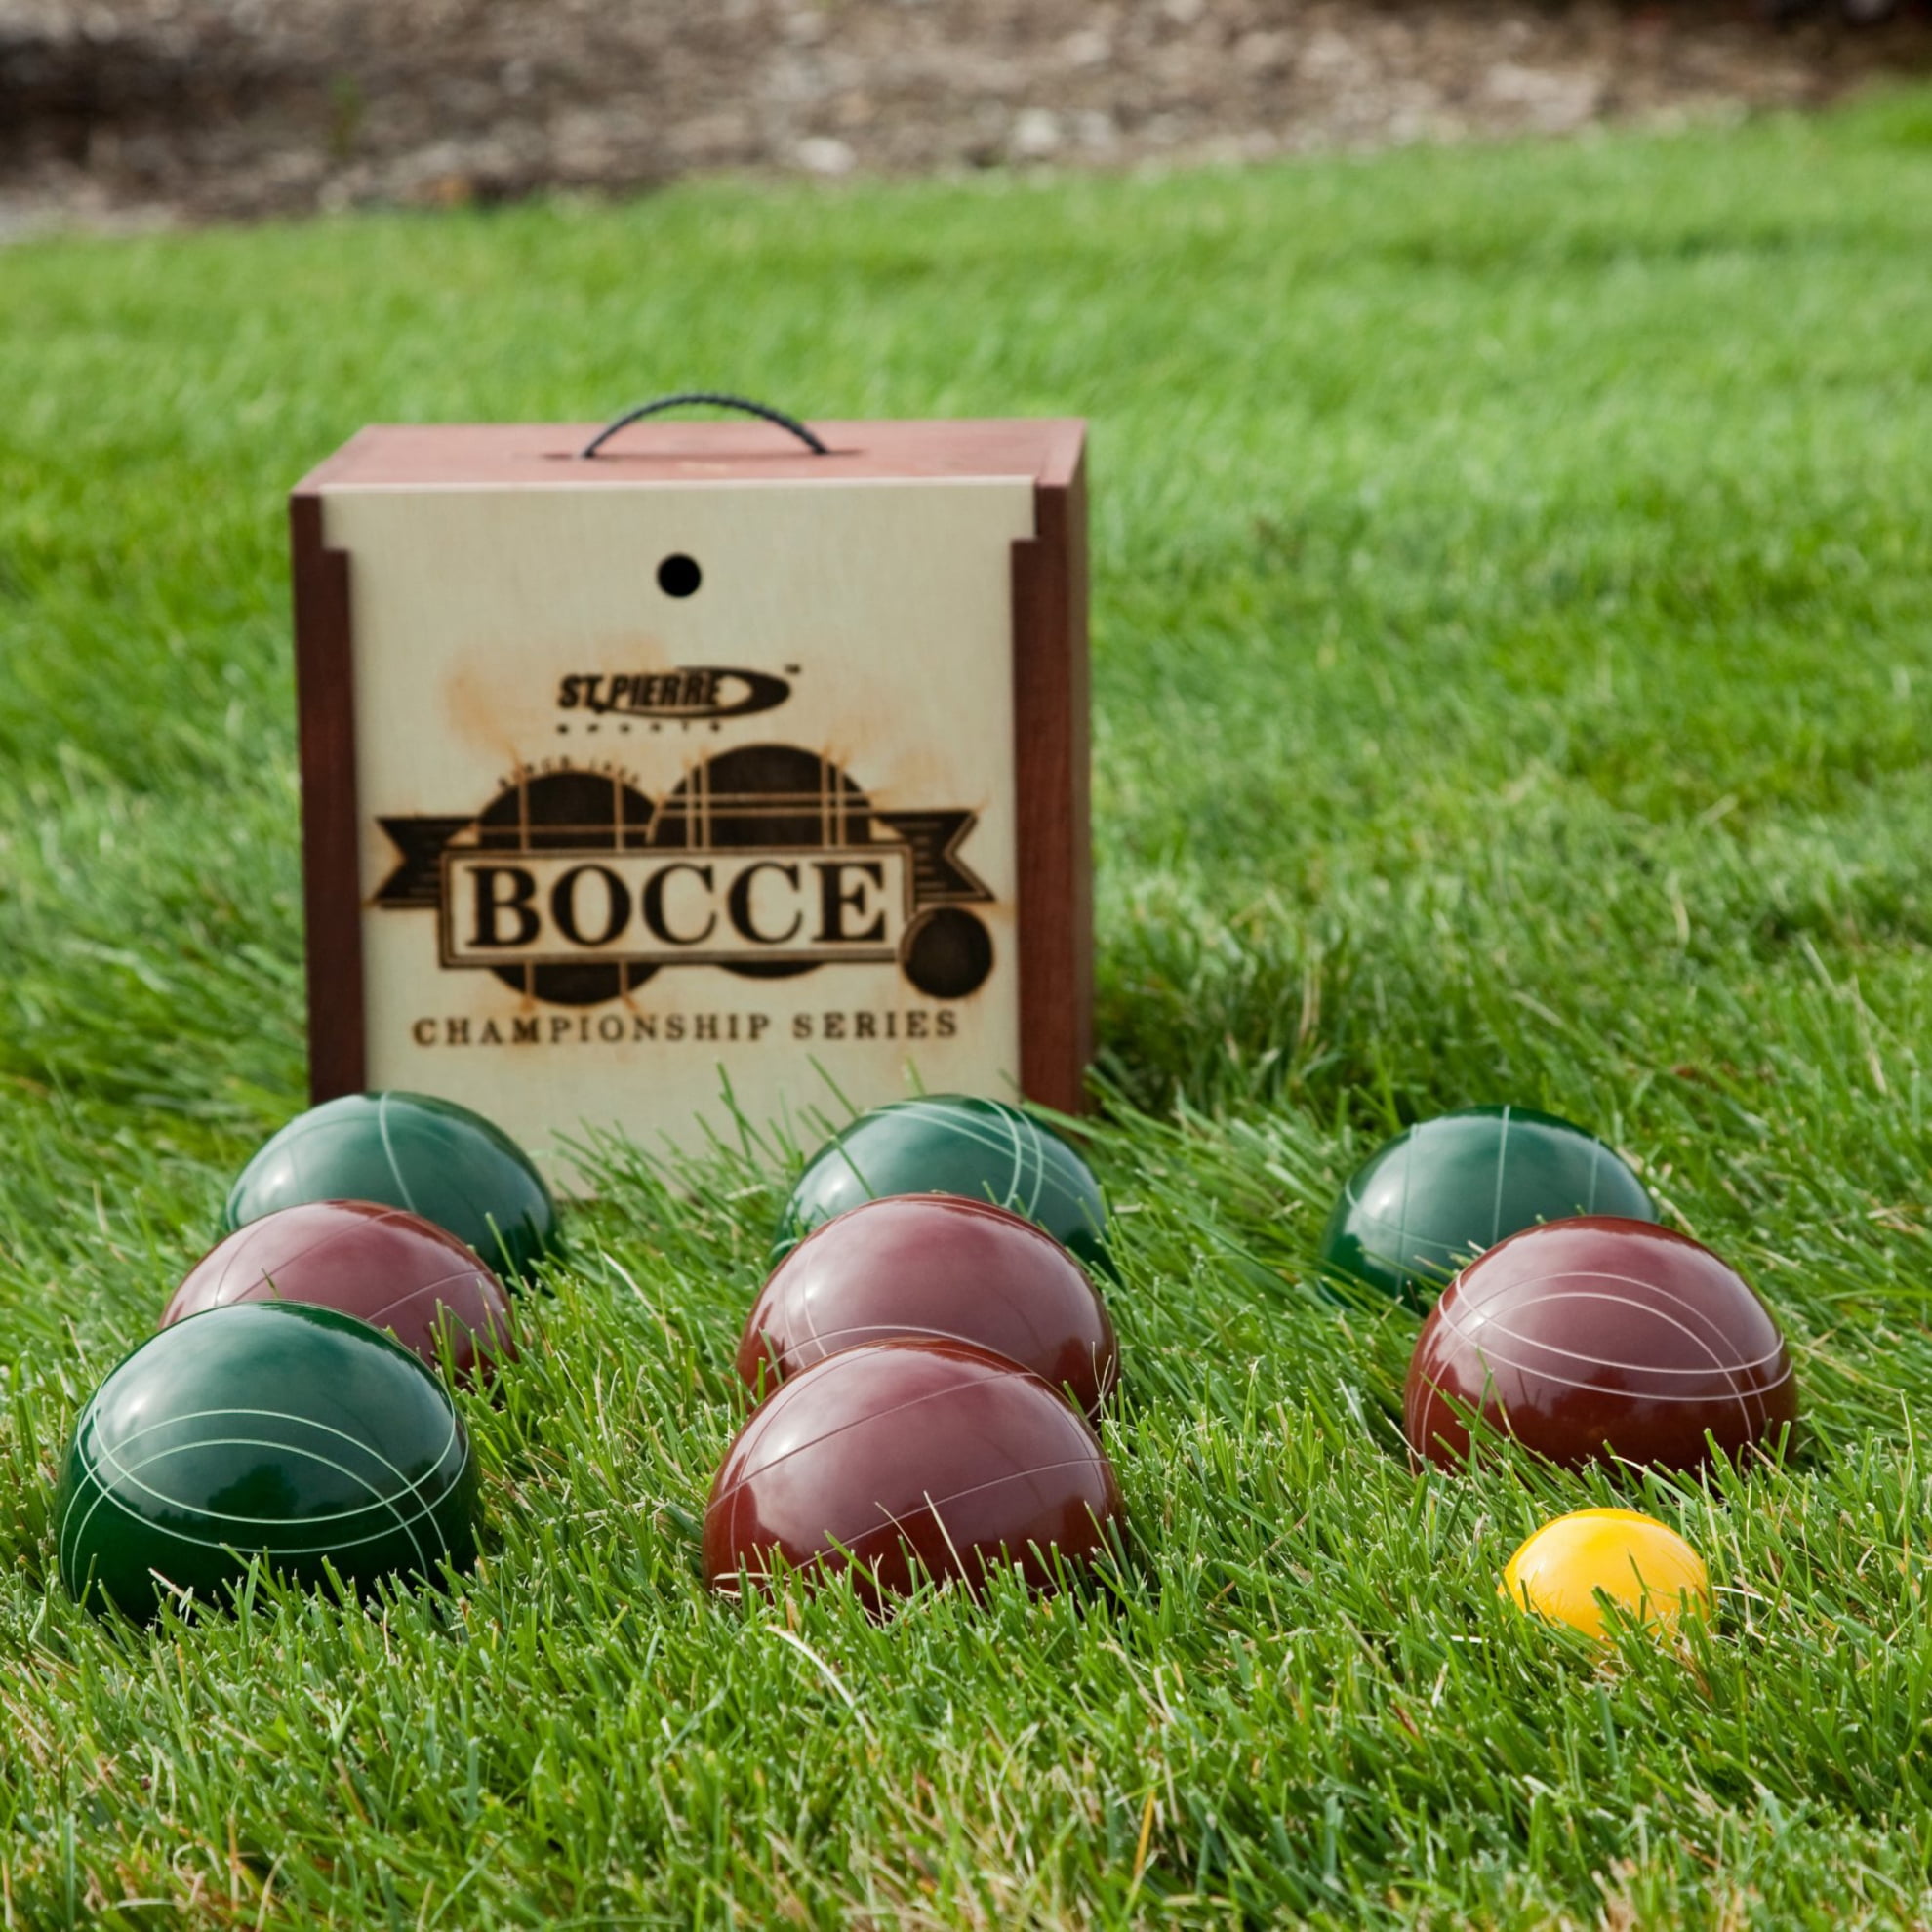 St Pierre TB2 Tournament Series Bocce Outfit in Wood Box-